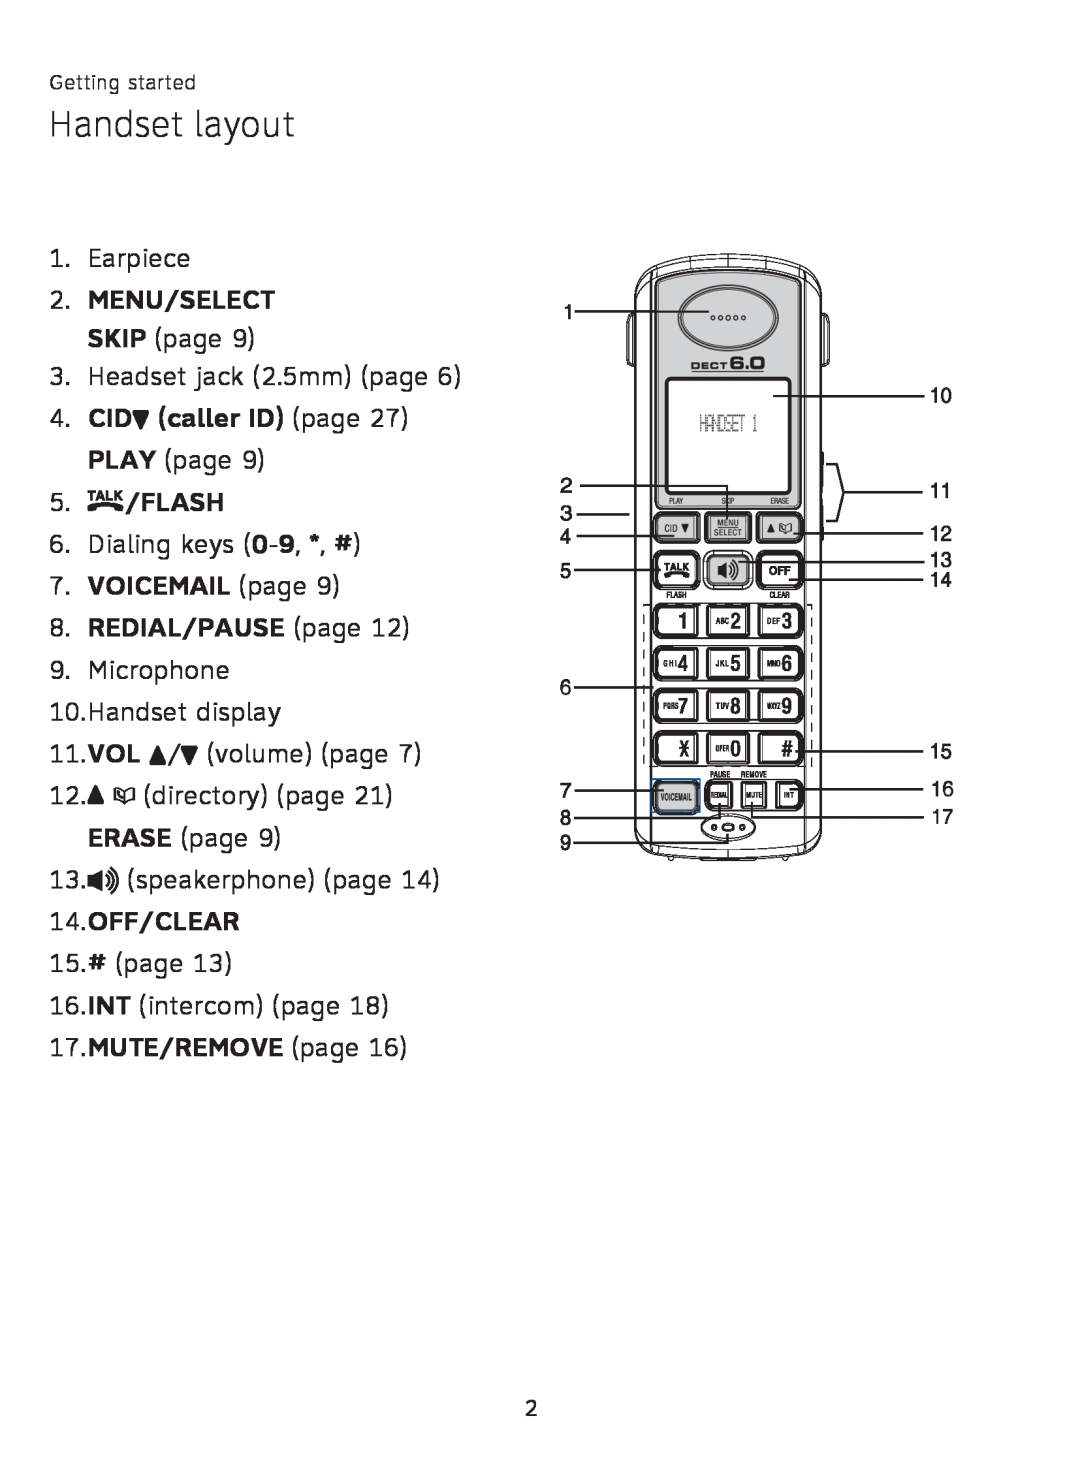 AT&T AT3111-2 user manual Handset layout, MENU/SELECT SKIP page, CIDcaller ID page 27 PLAY page 5./FLASH, 14.OFF/CLEAR 